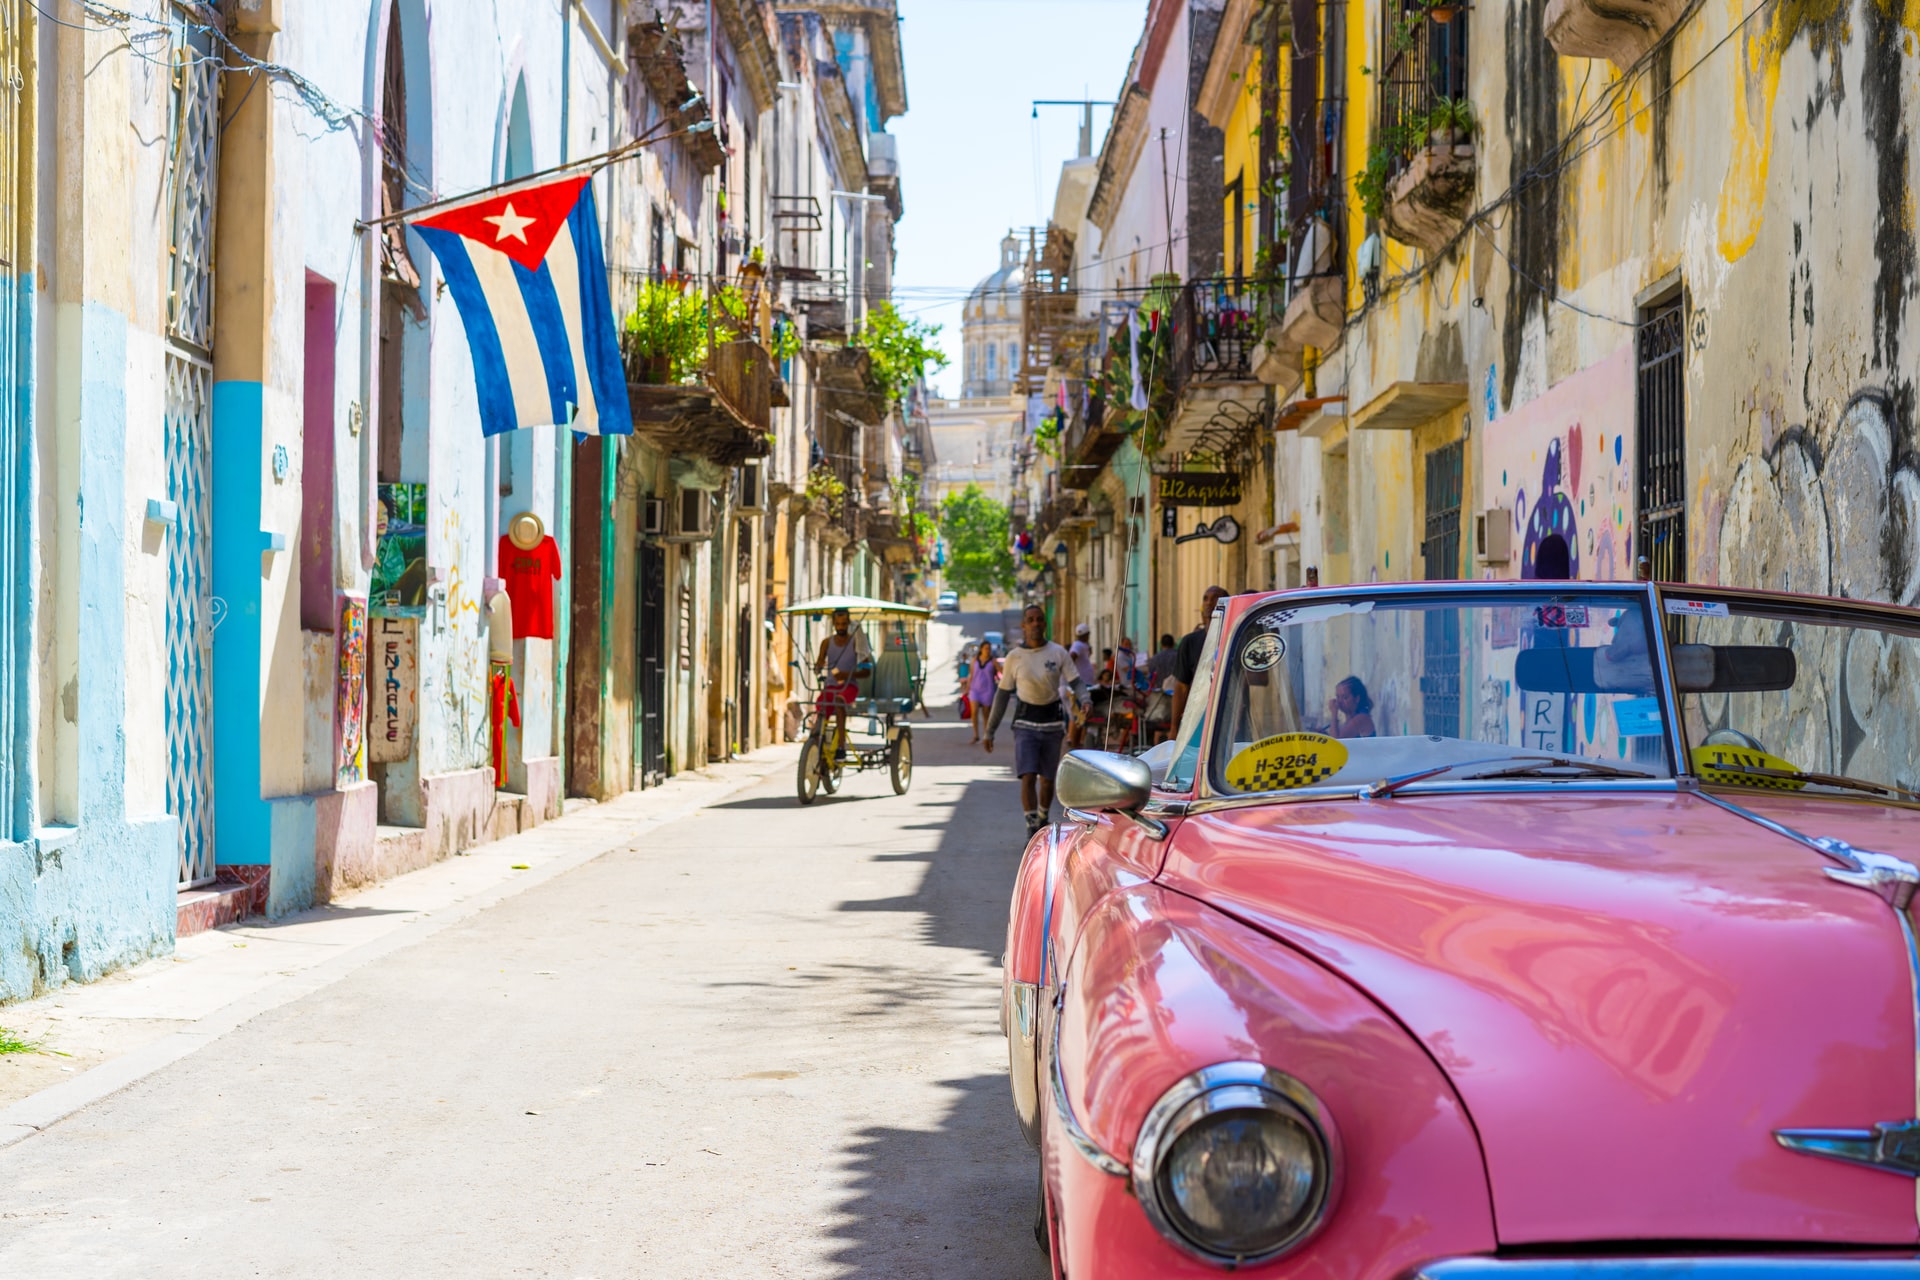 Cuba Planning To Remove Testing Requirement For Visitors From Nov. 15